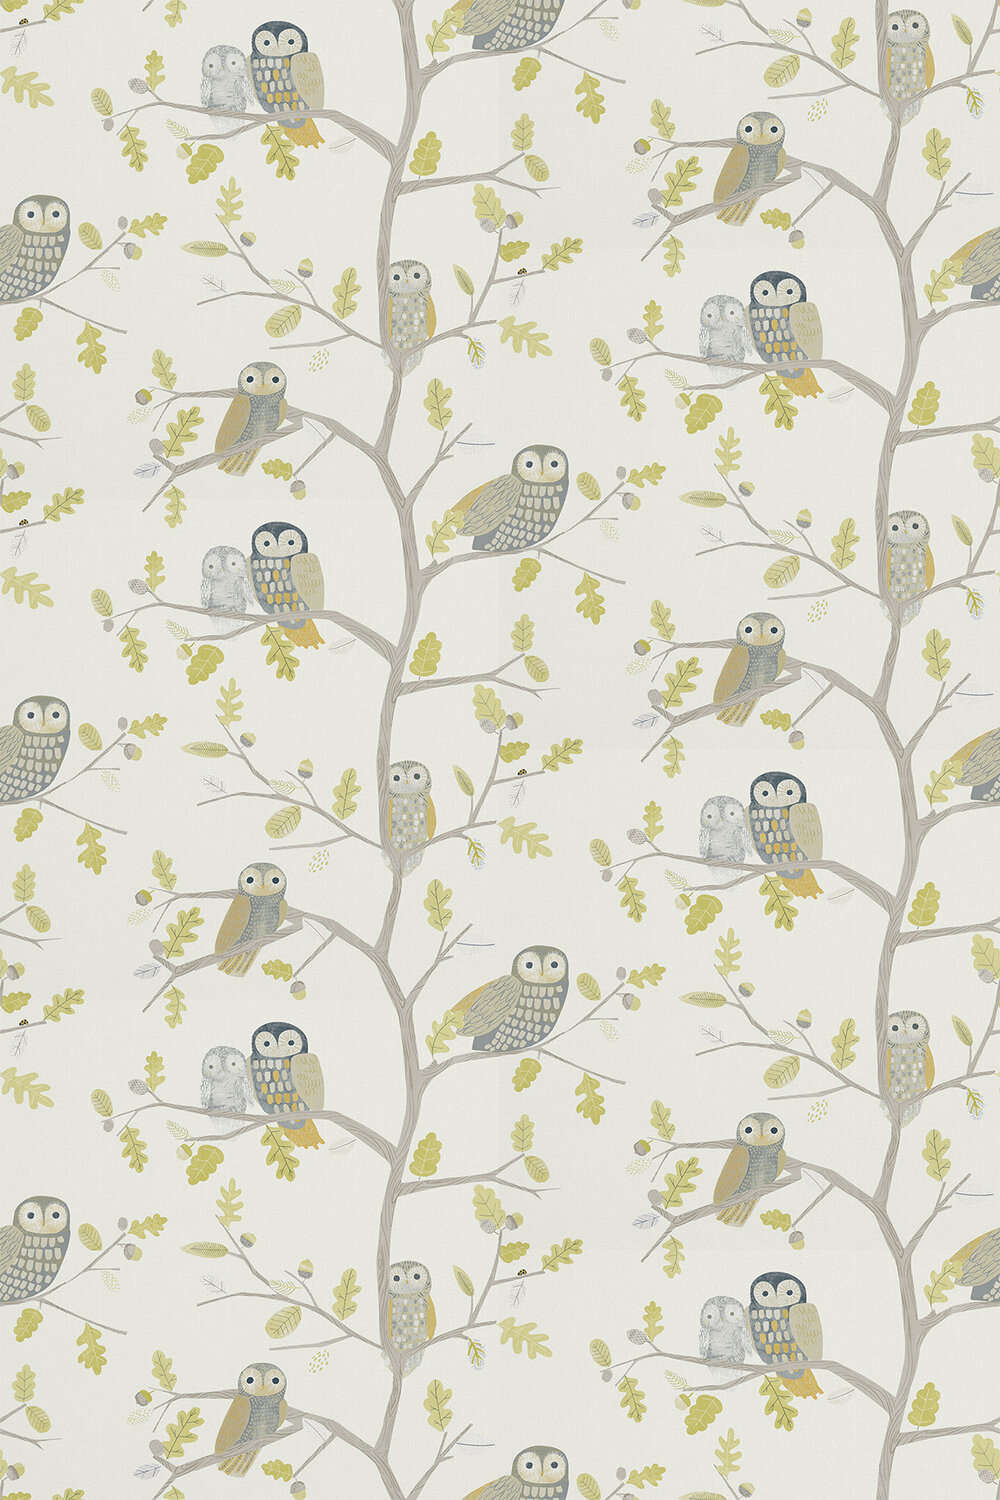 Little Owls Fabric - Kiwi - by Harlequin